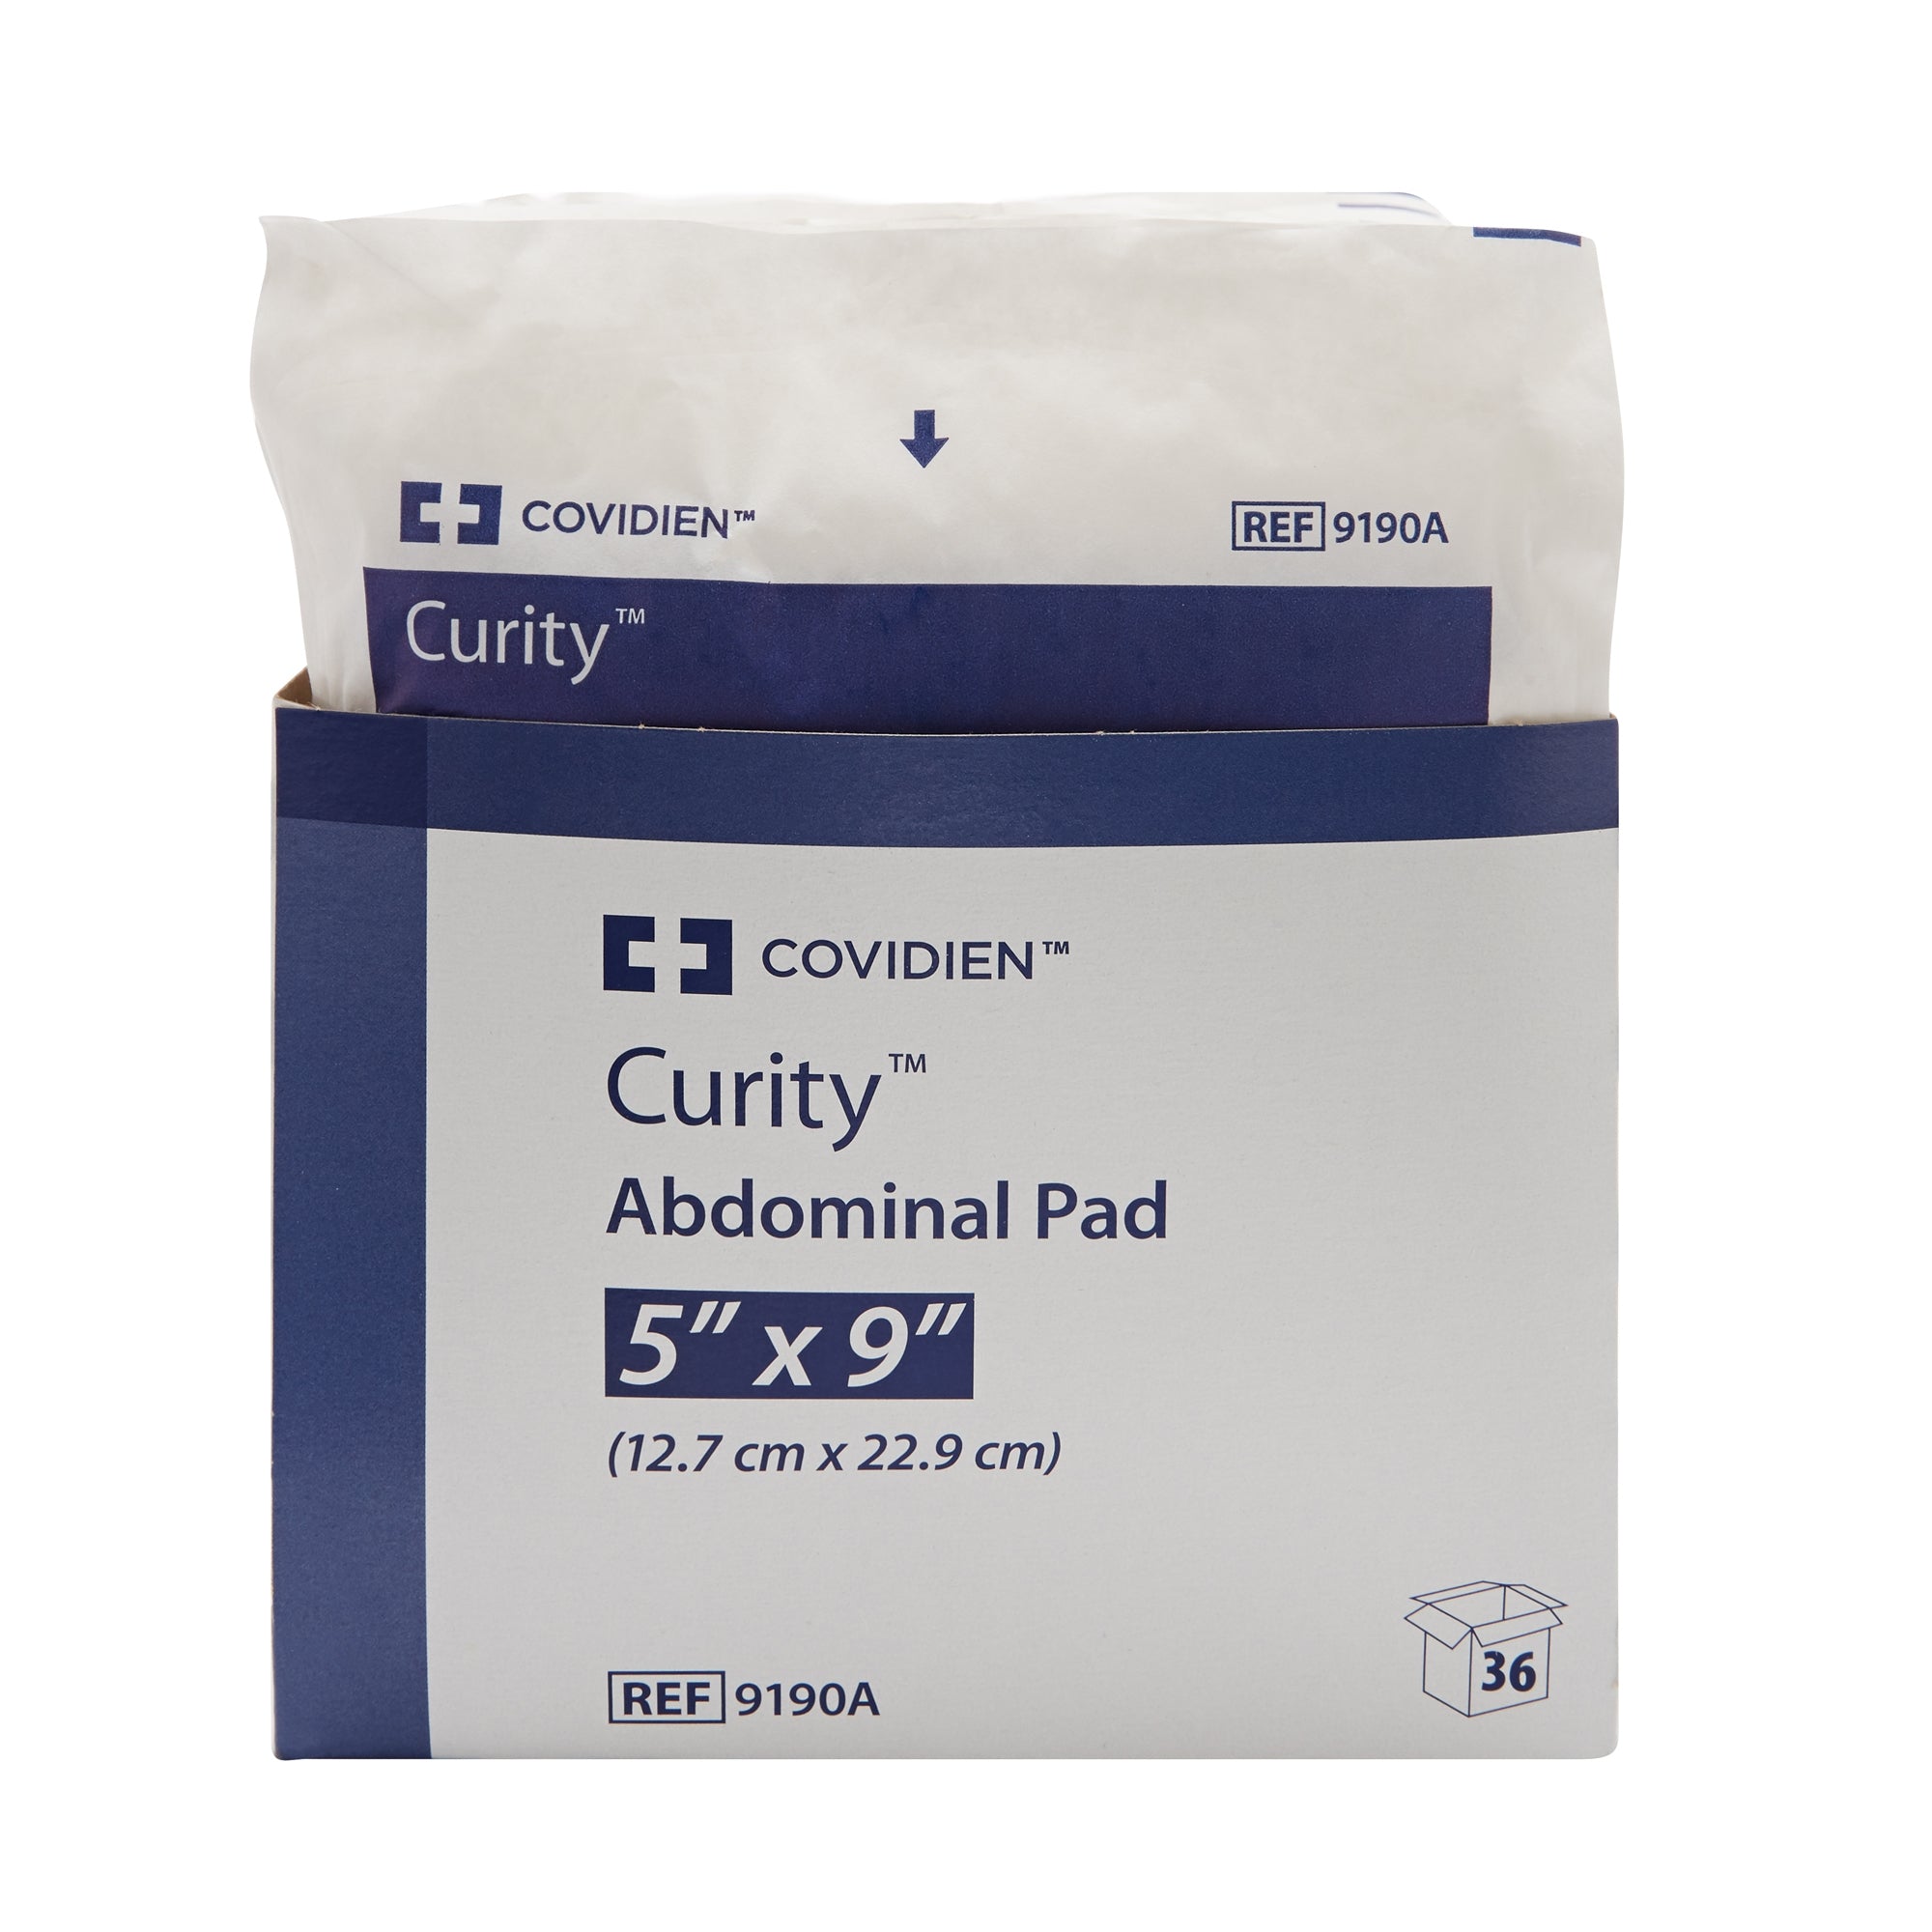 Curity WET-PRUF™ Sterile Abdominal Pad